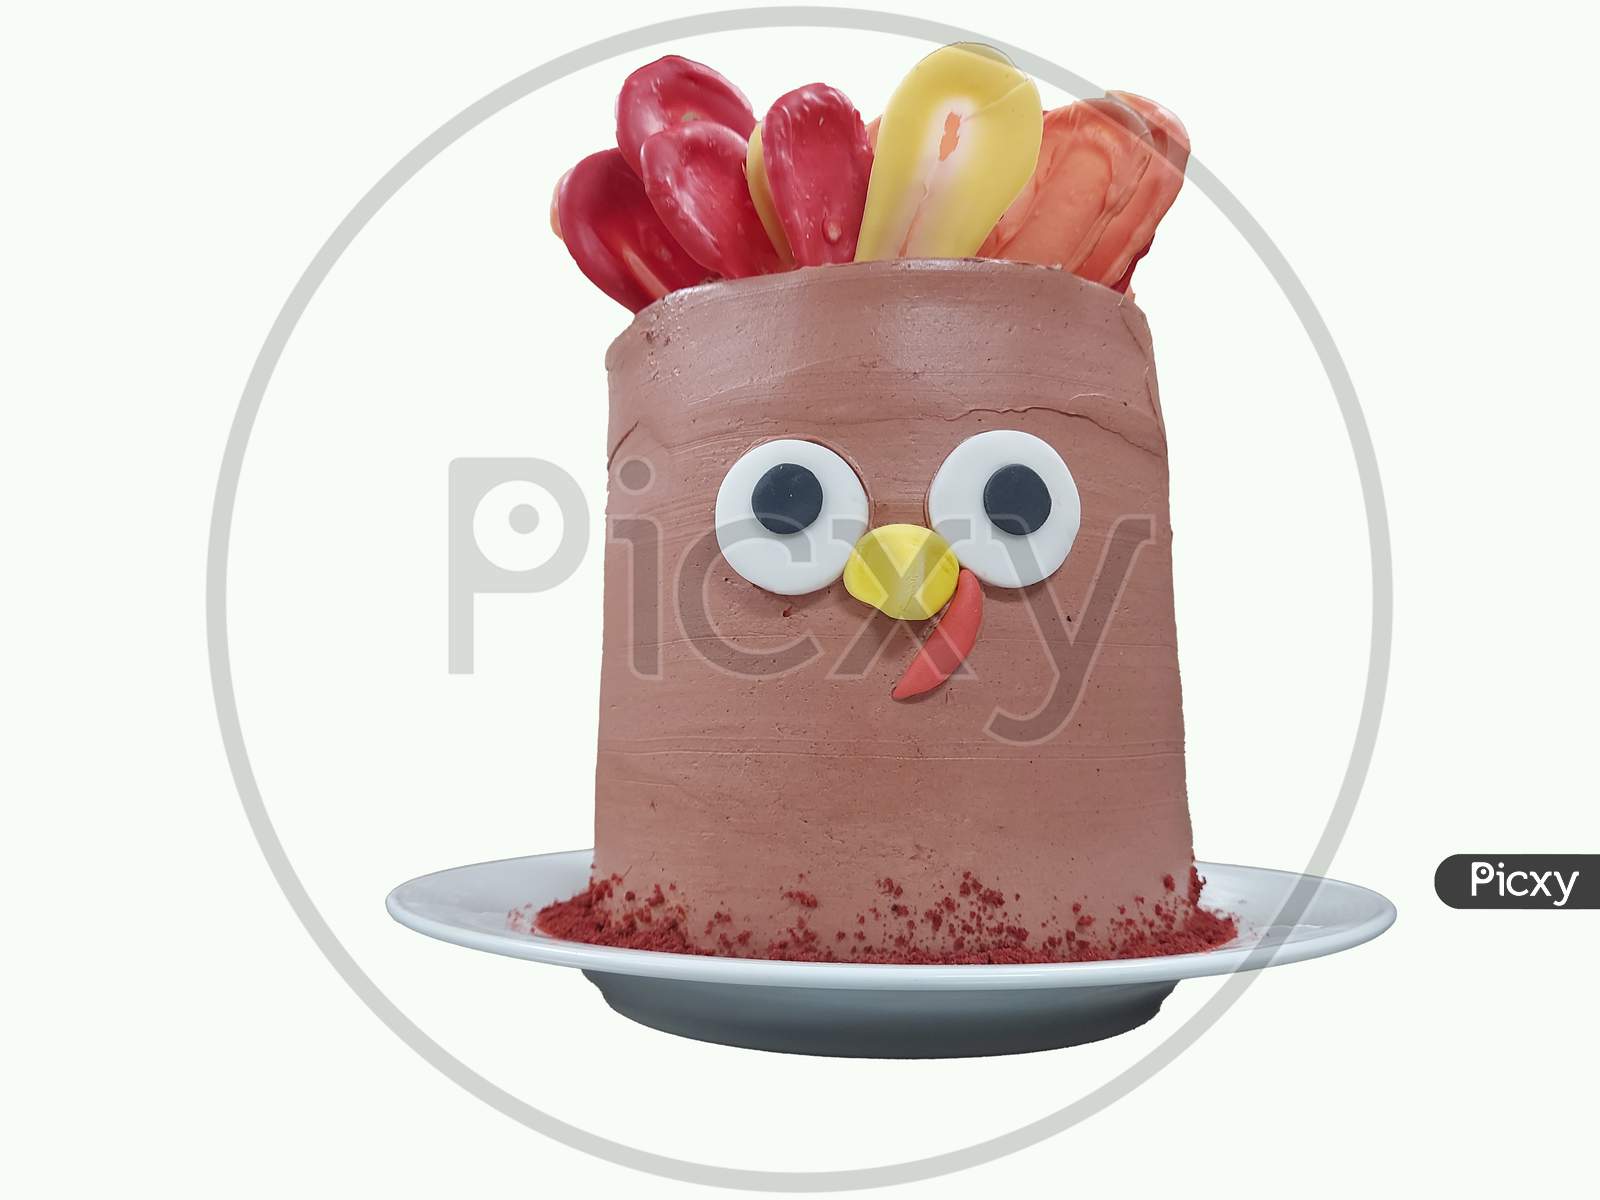 Turkey Face On A Cake ,Isolated In White Background